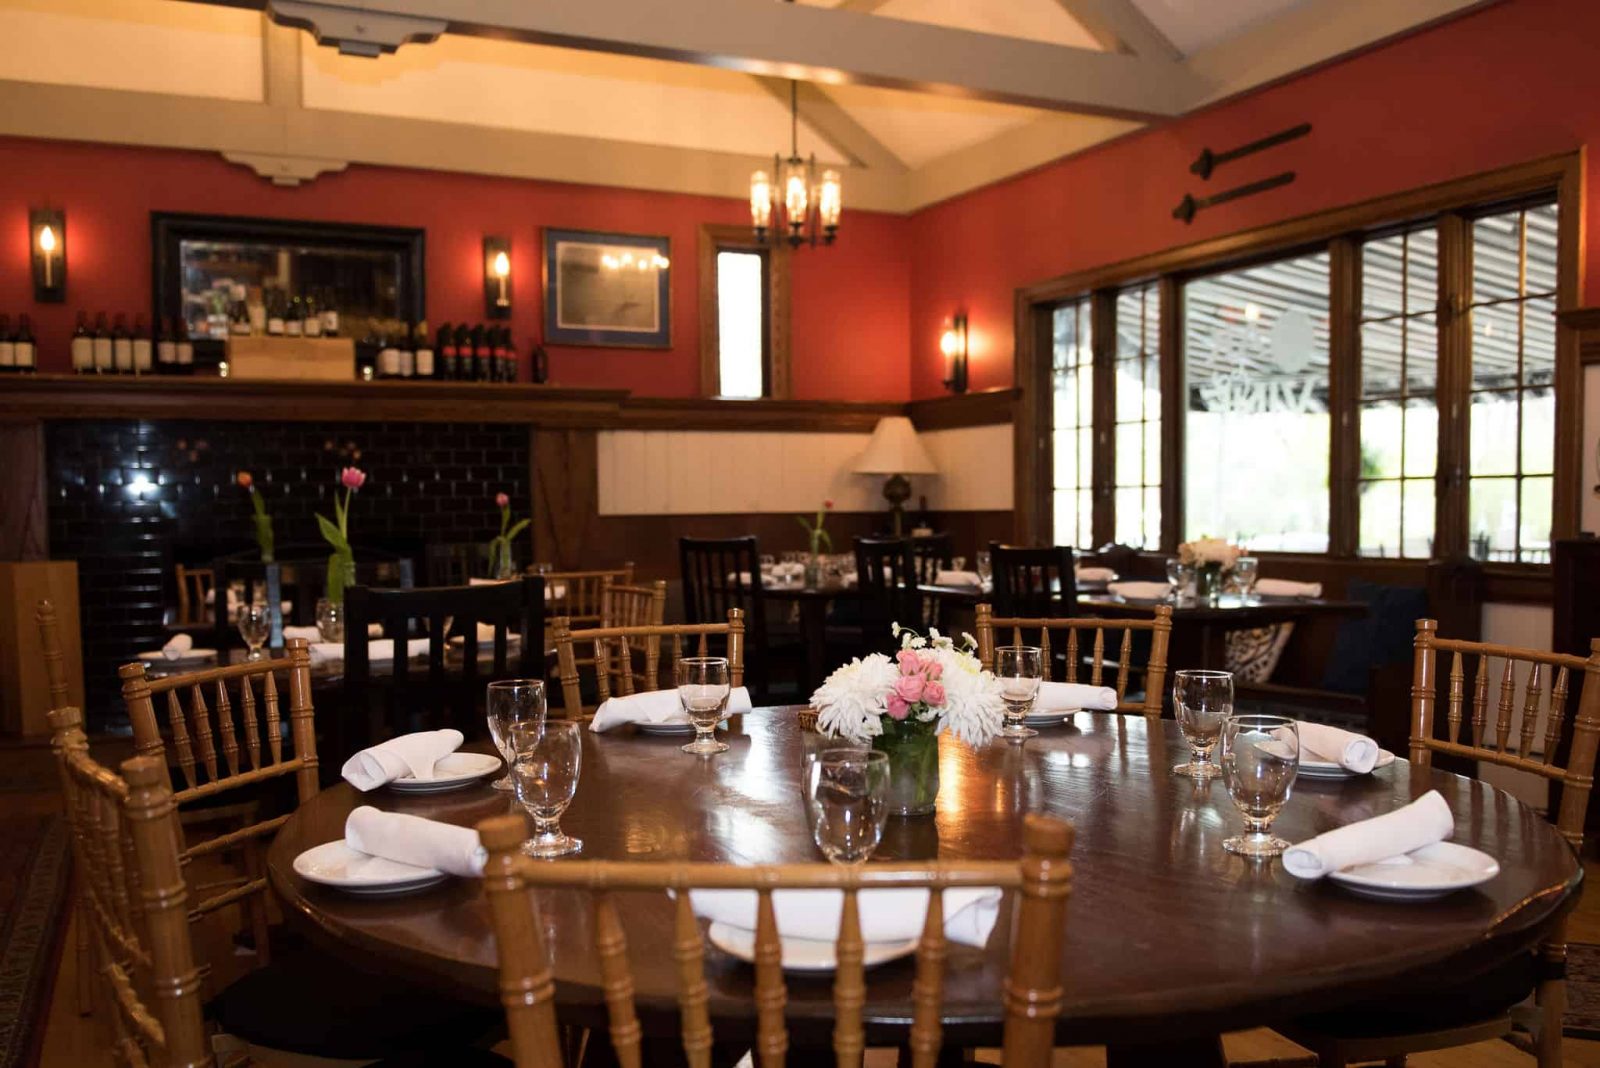 The rustic Oak and Vine dining room